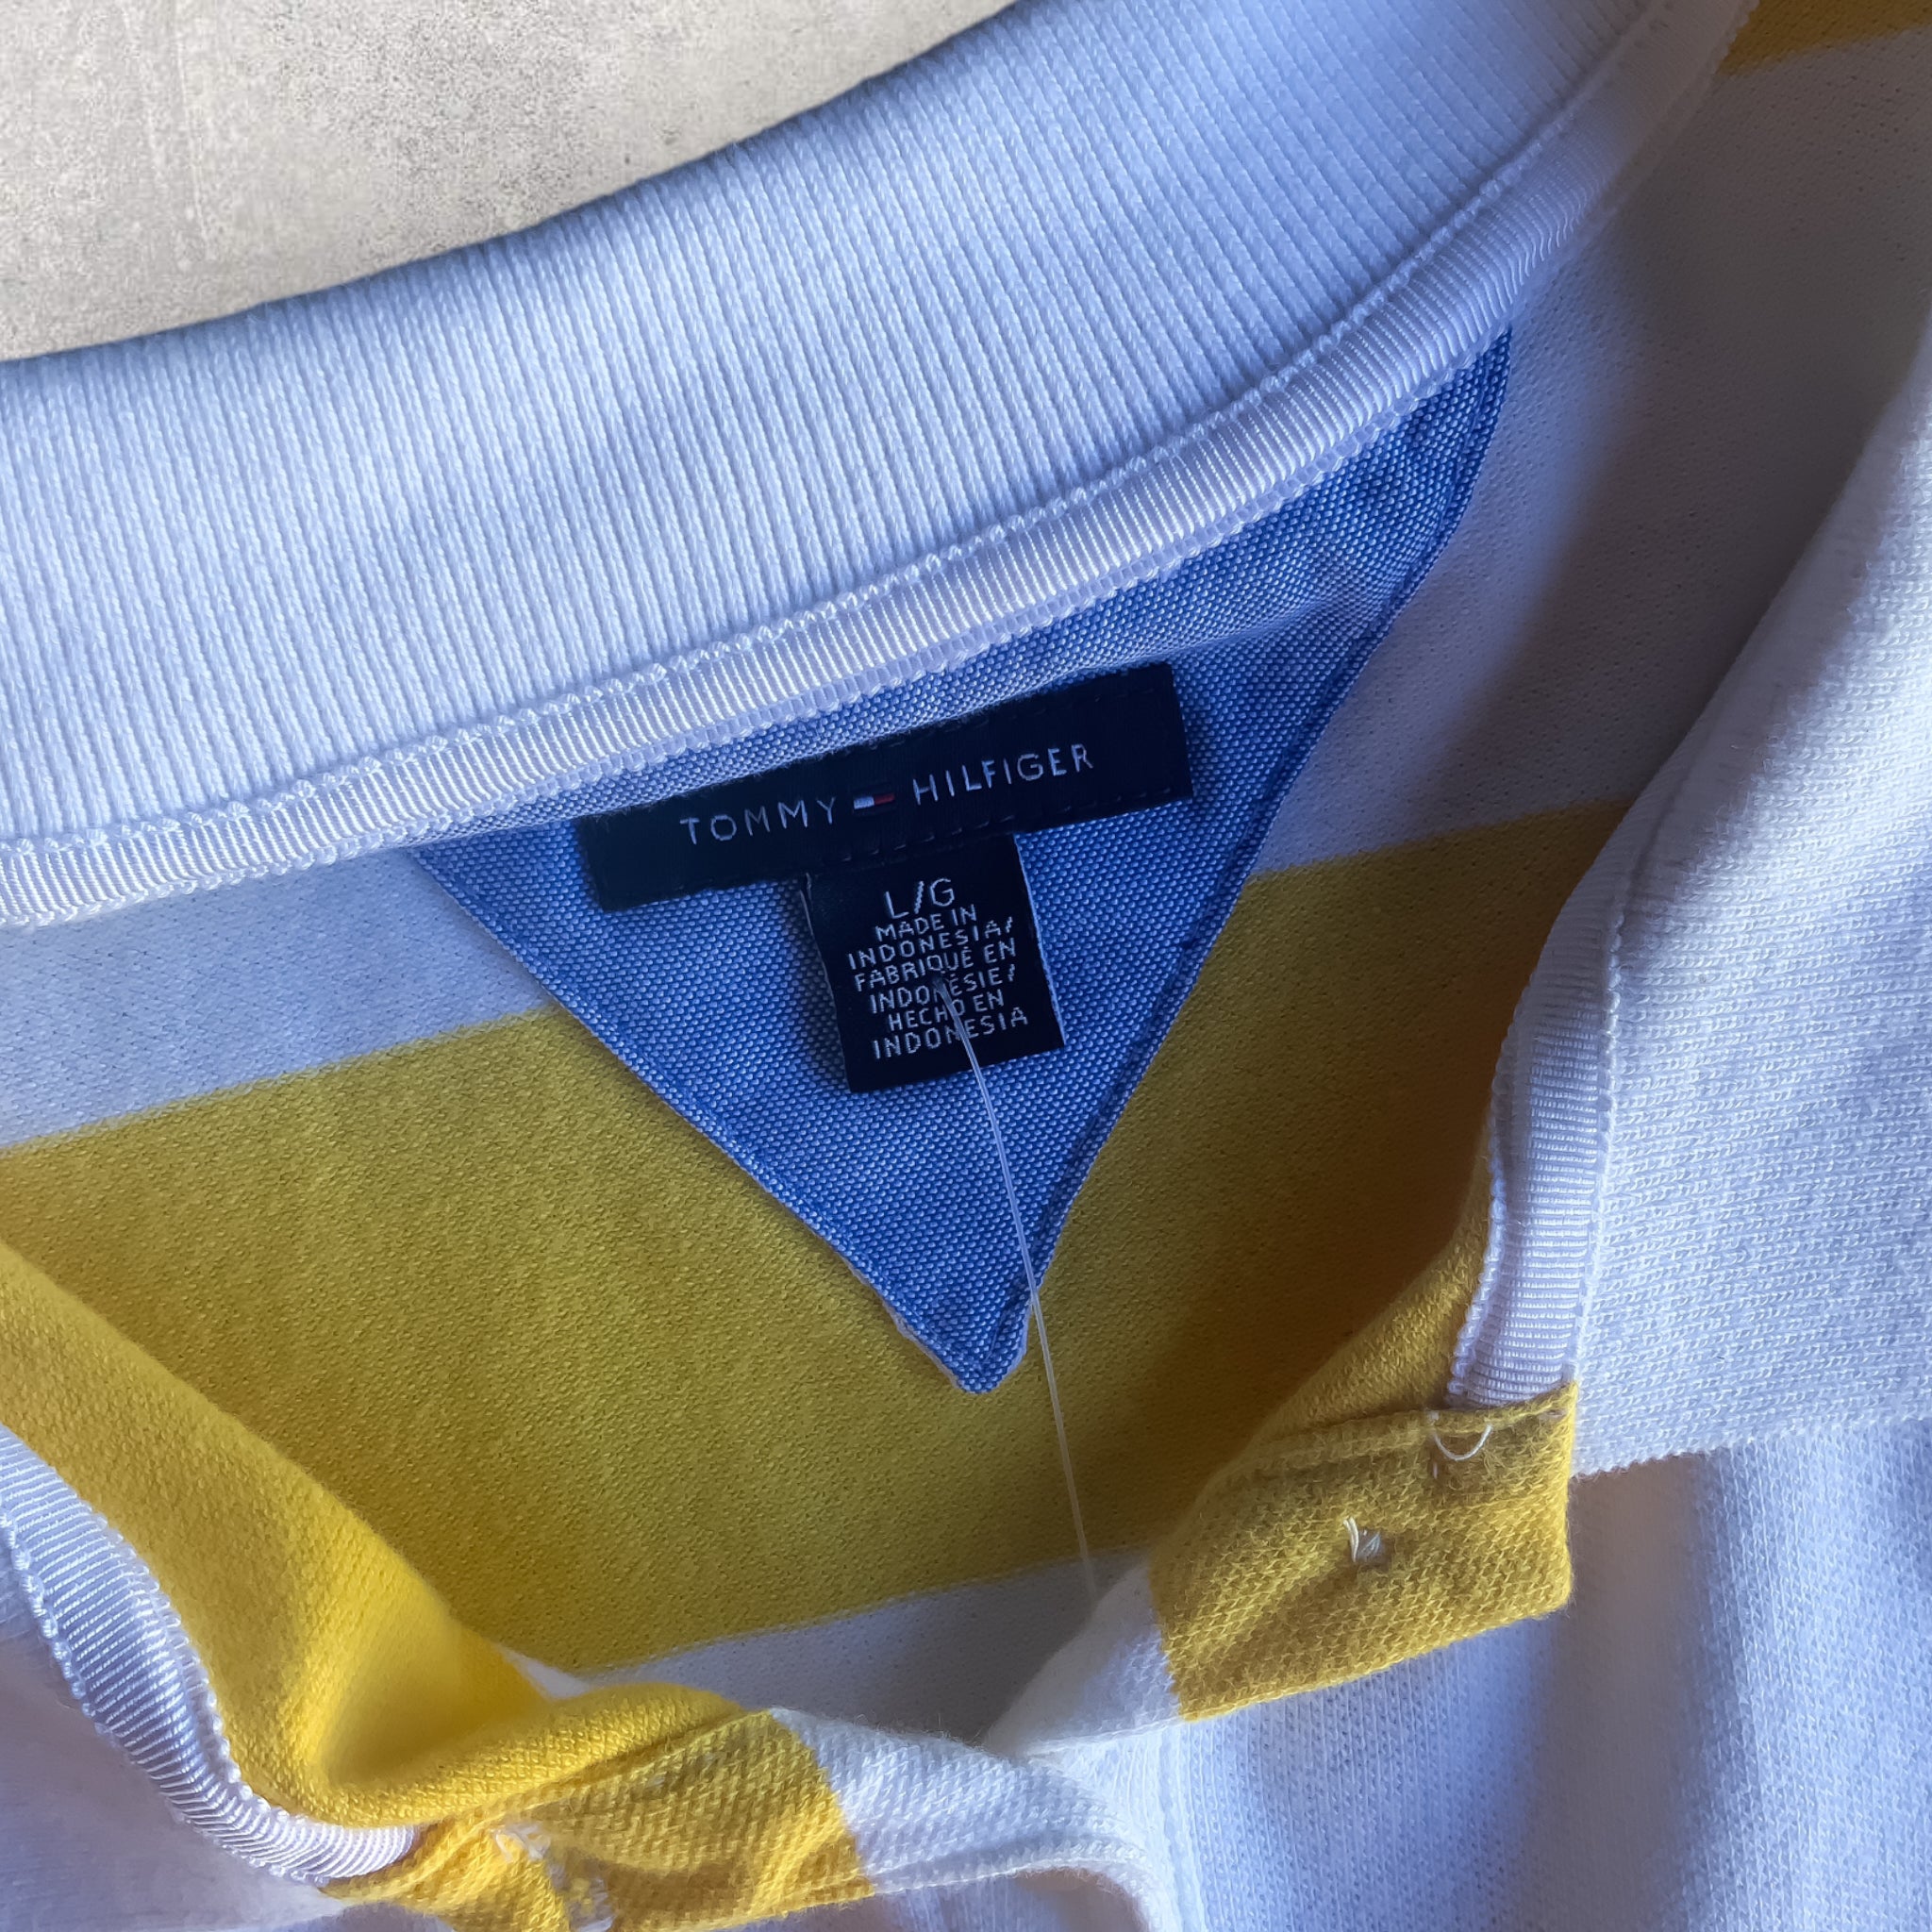 TOMMY HILFIGER Yellow/White Striped Jersey Polo Top - Size L